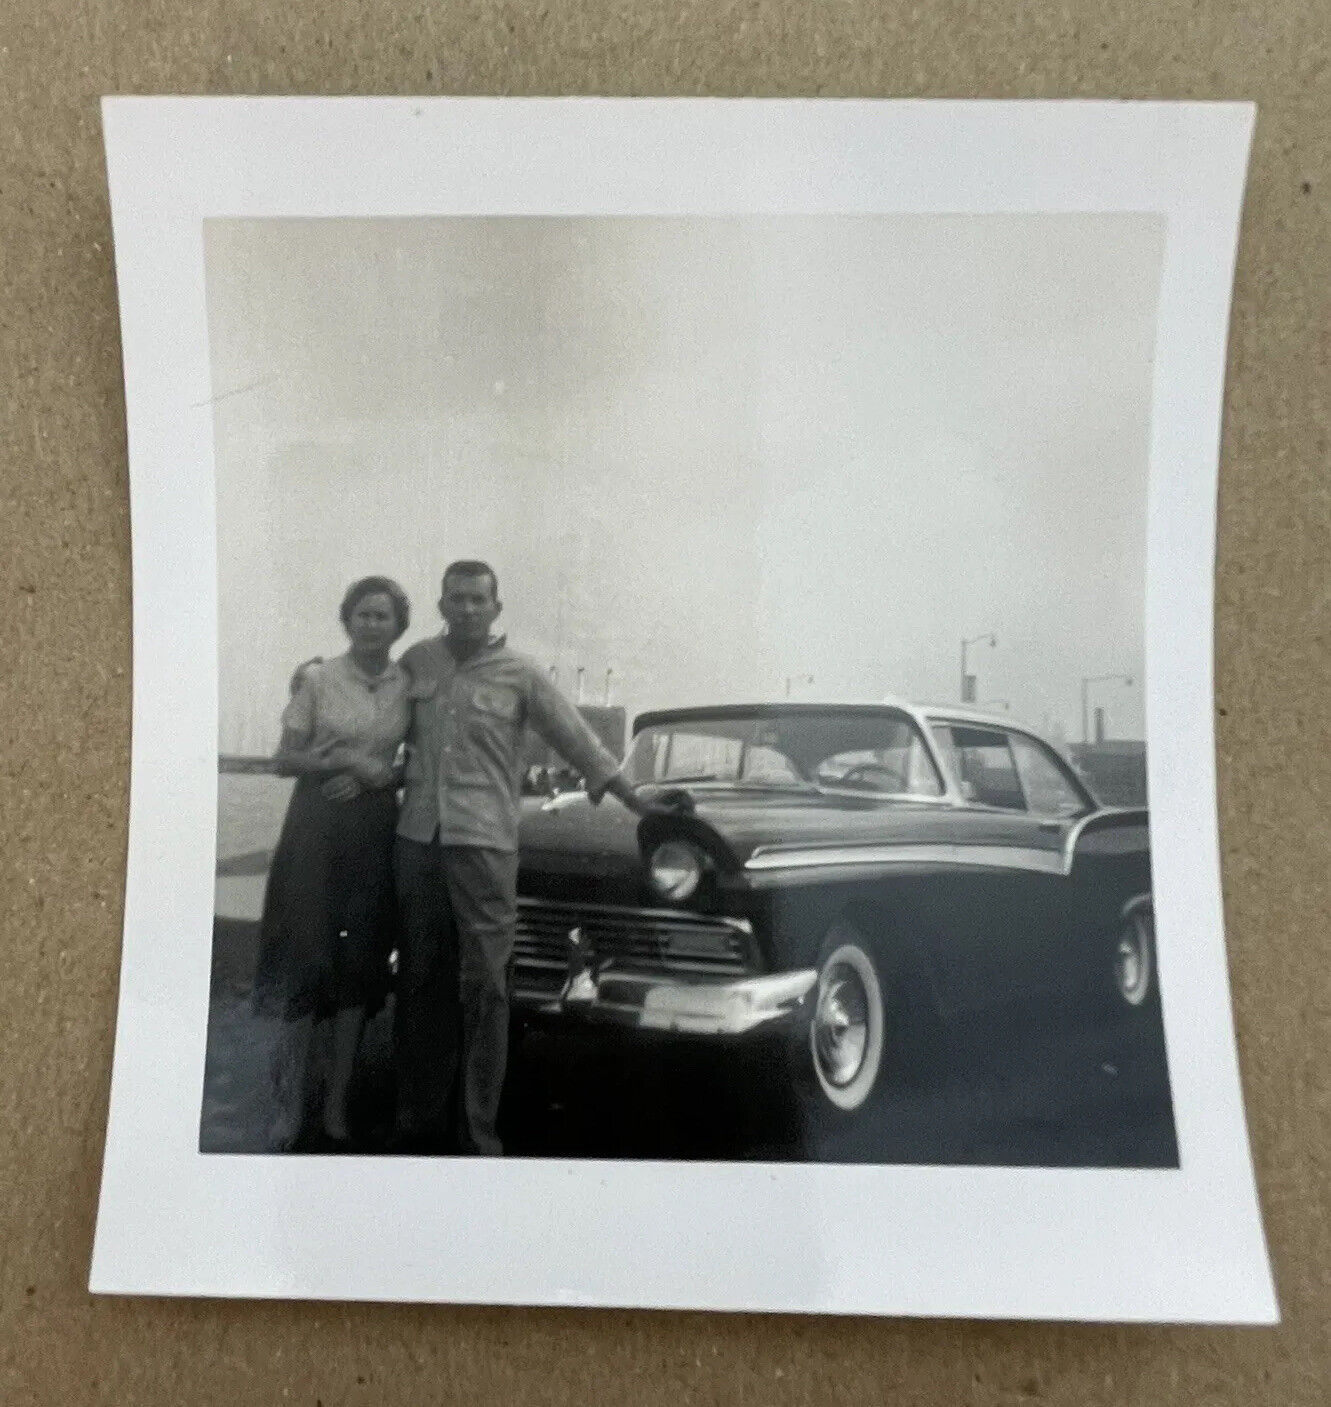 Vtg 1950s Snapshot Photo Couple With Ford Fairlane Classic Car